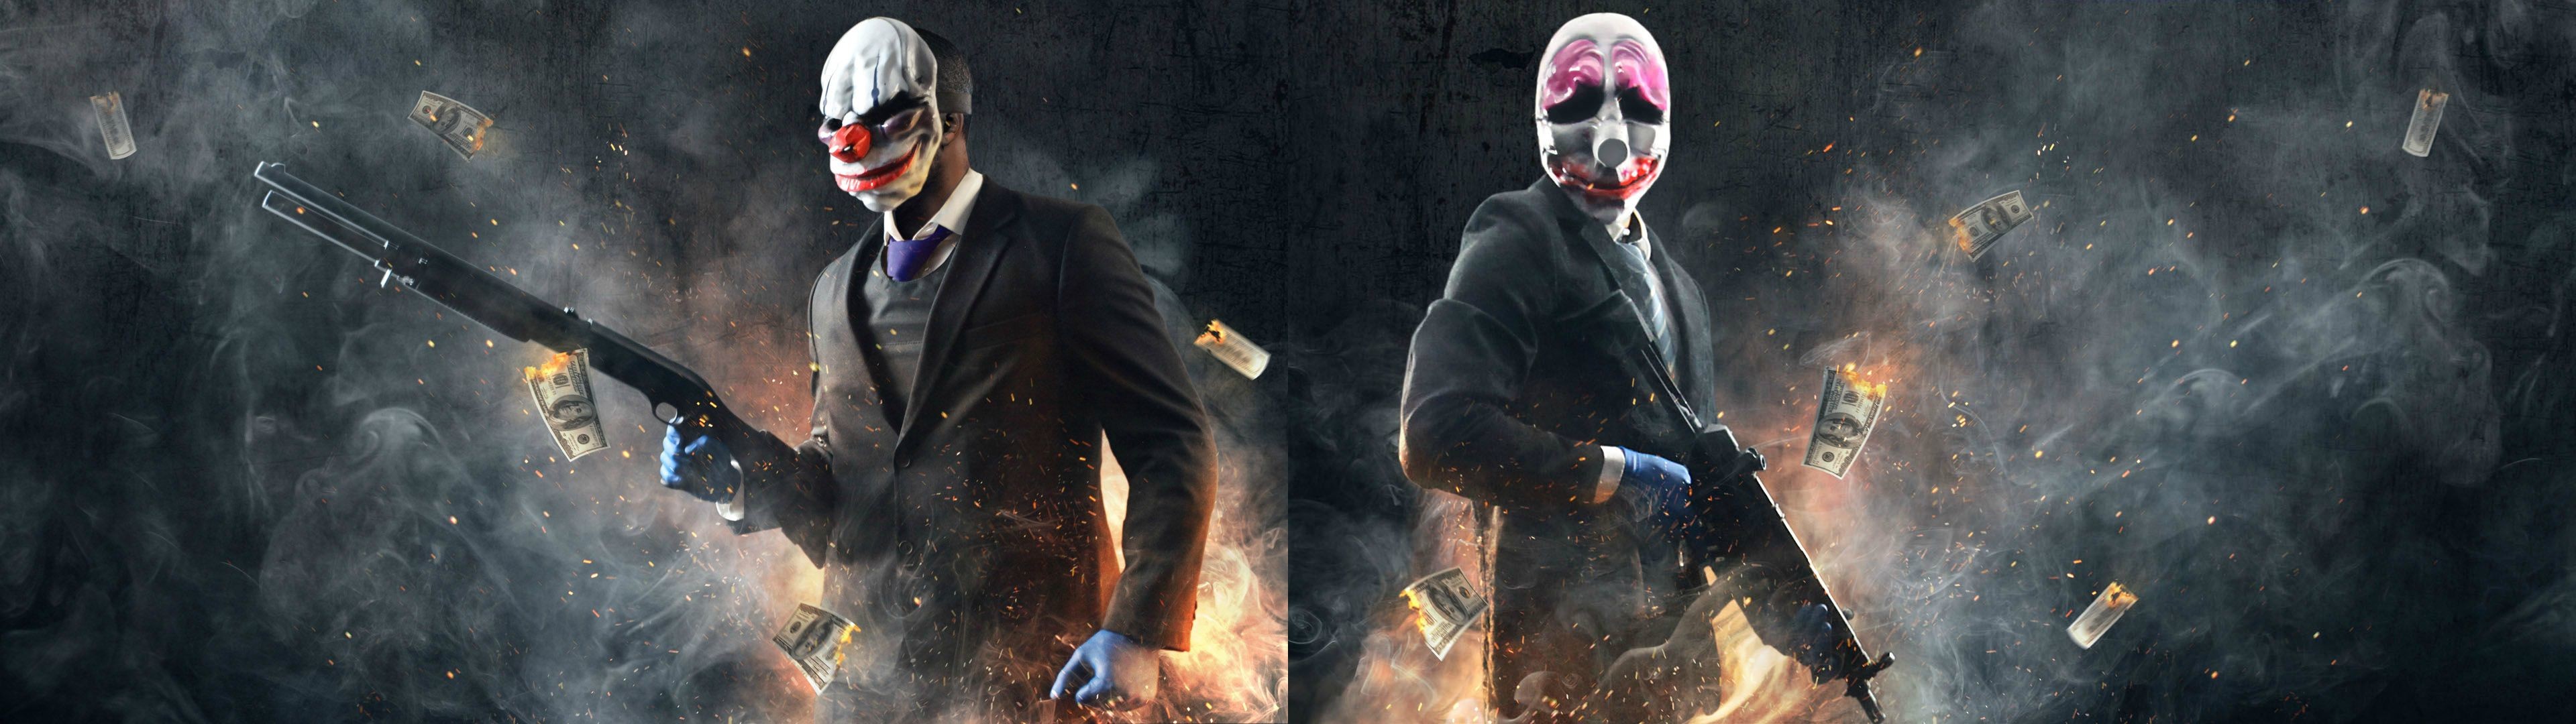 3840x1080 A Payday 2 dual monitor wallpaper i made from steam cards () ...